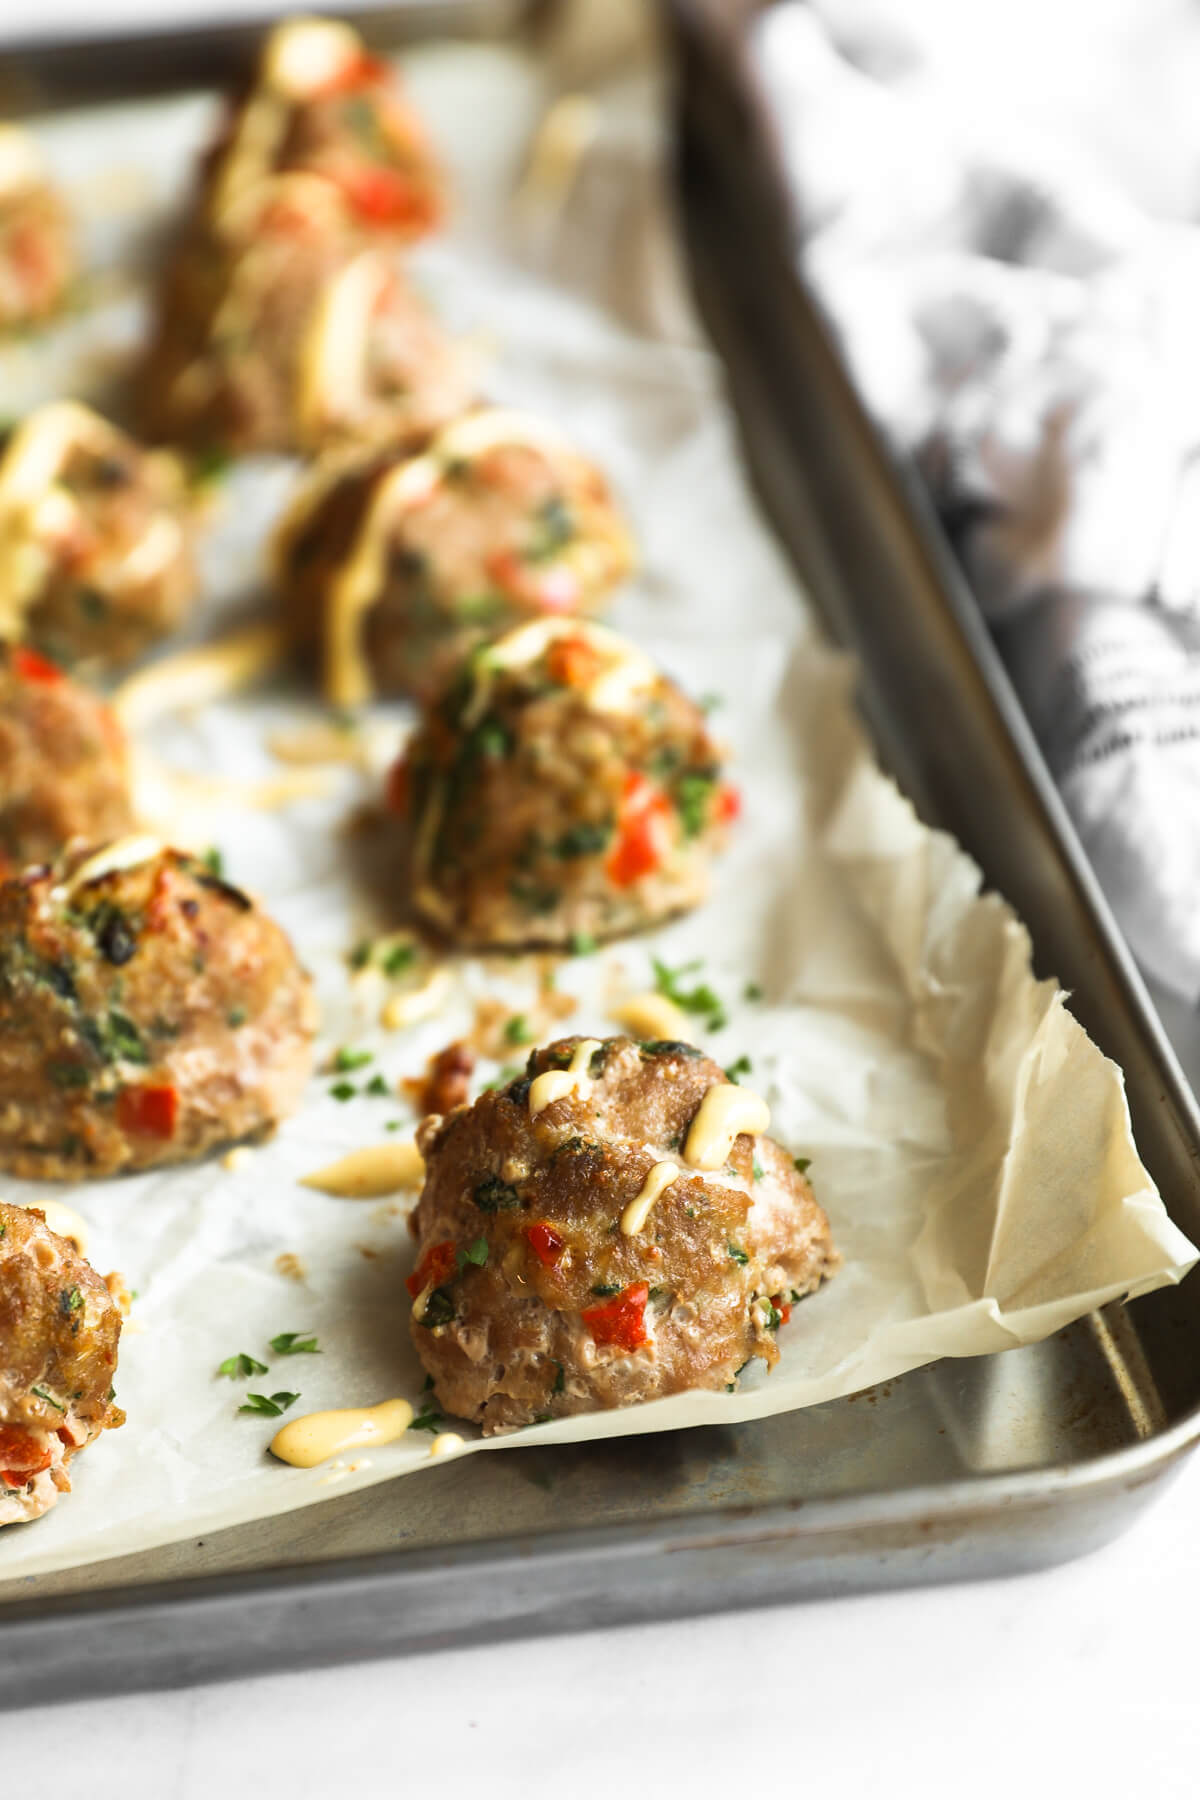 Angled image of turkey meatballs on a sheet pan with spicy aioli sauce drizzled on top. One meatball in focus with the rest blurred in the background.